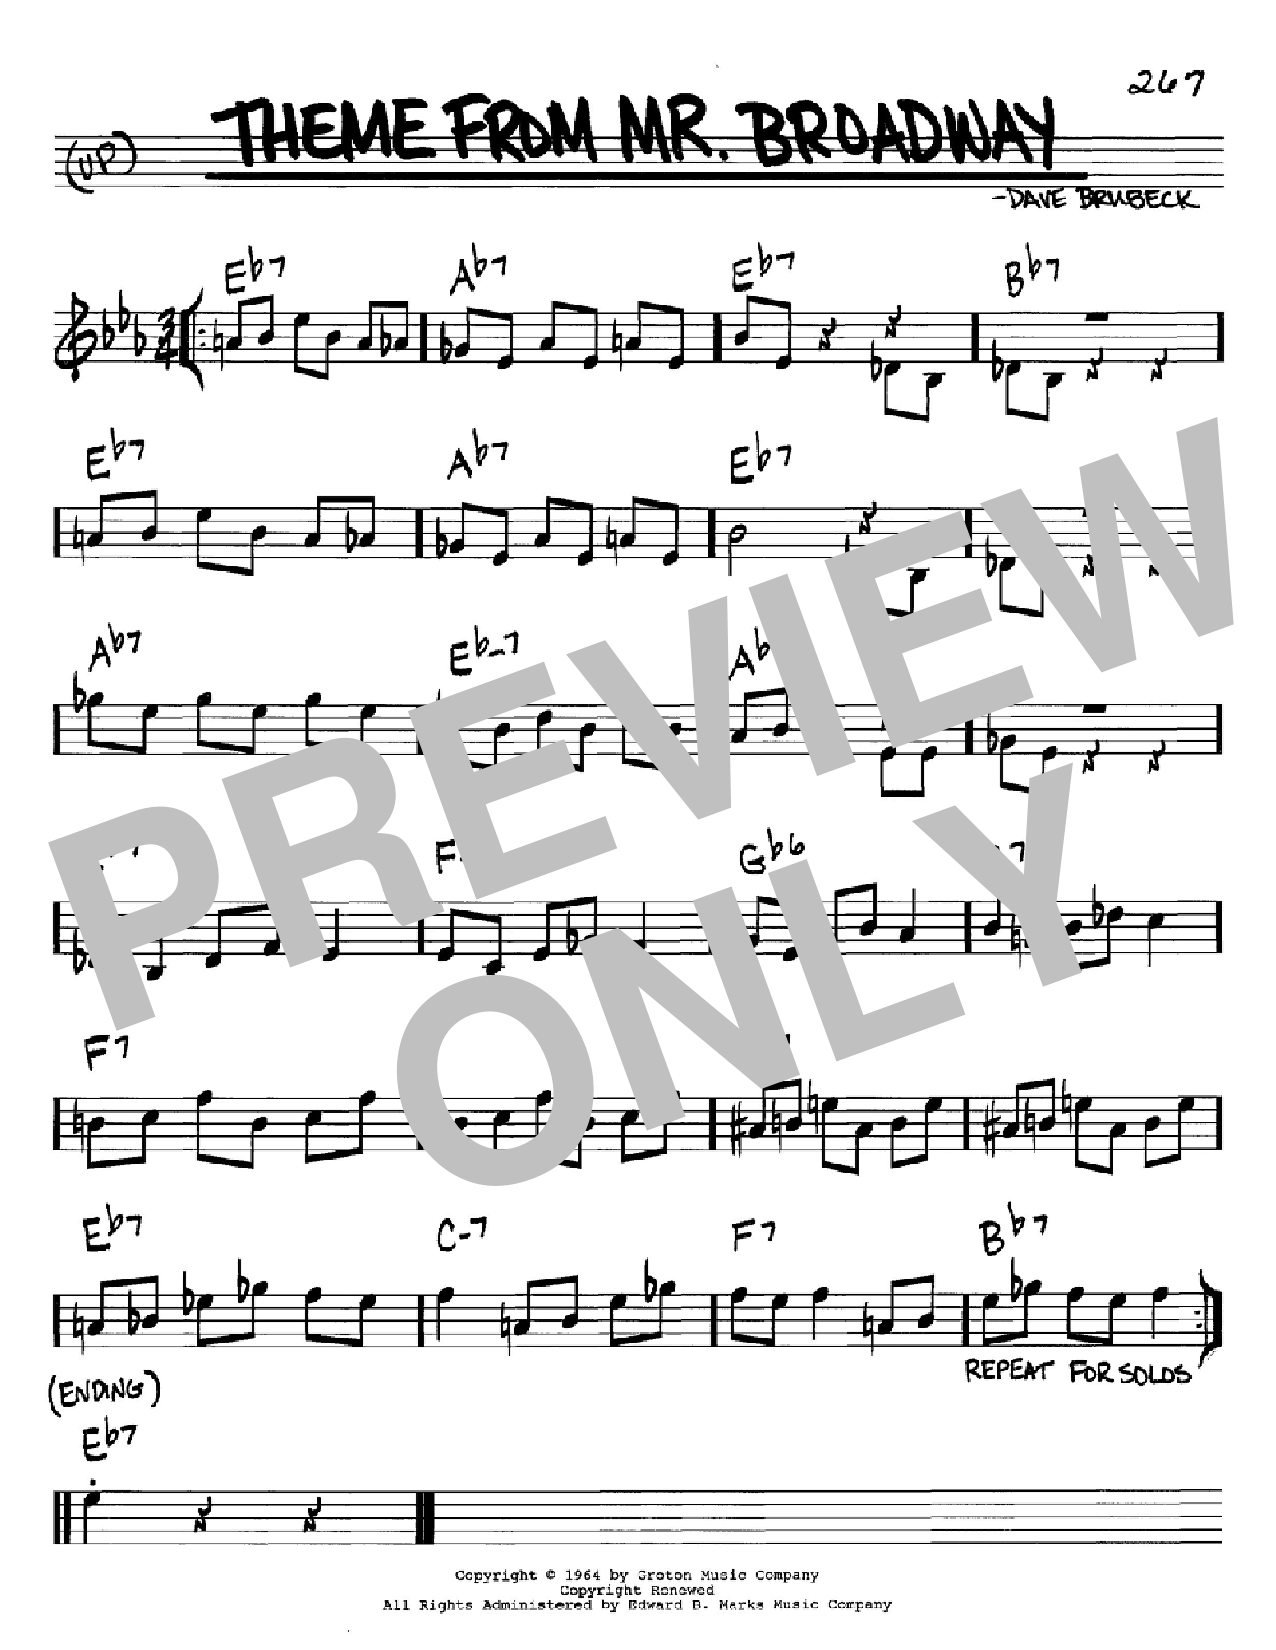 Download Dave Brubeck Theme From Mr. Broadway Sheet Music